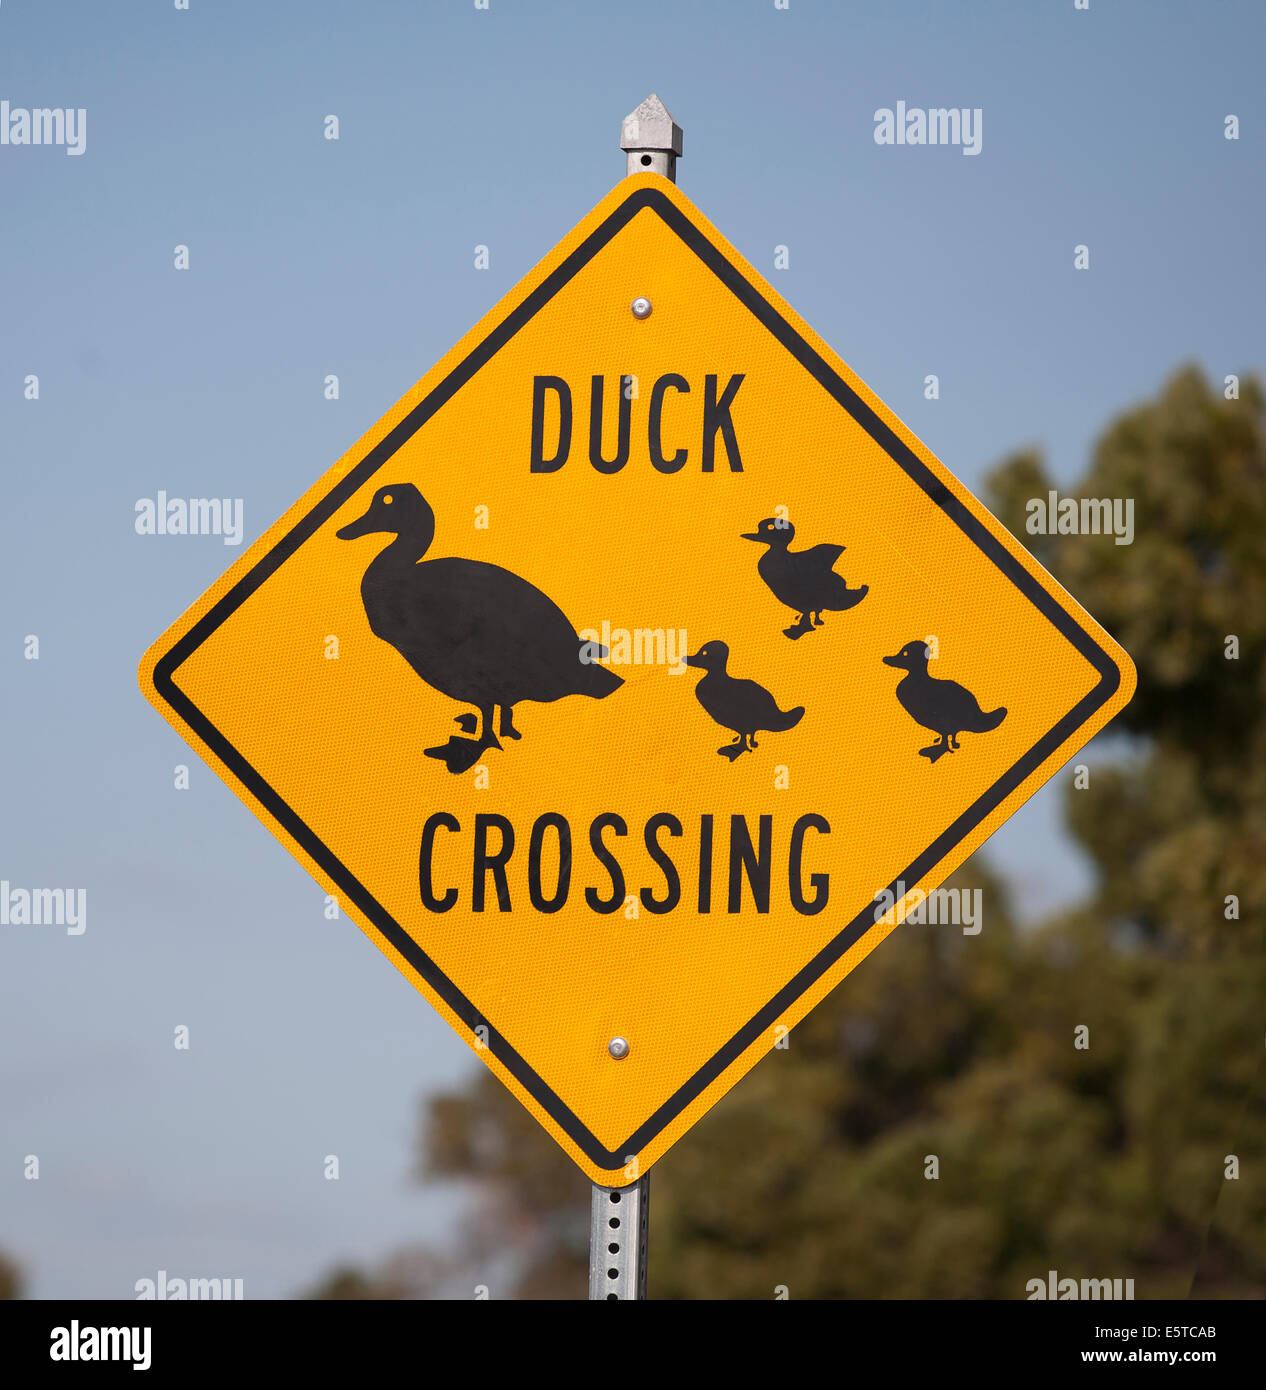 Image of a road sign in Sarasota Florida near a pond where families of Ducks actually cross the road. Stock Photo